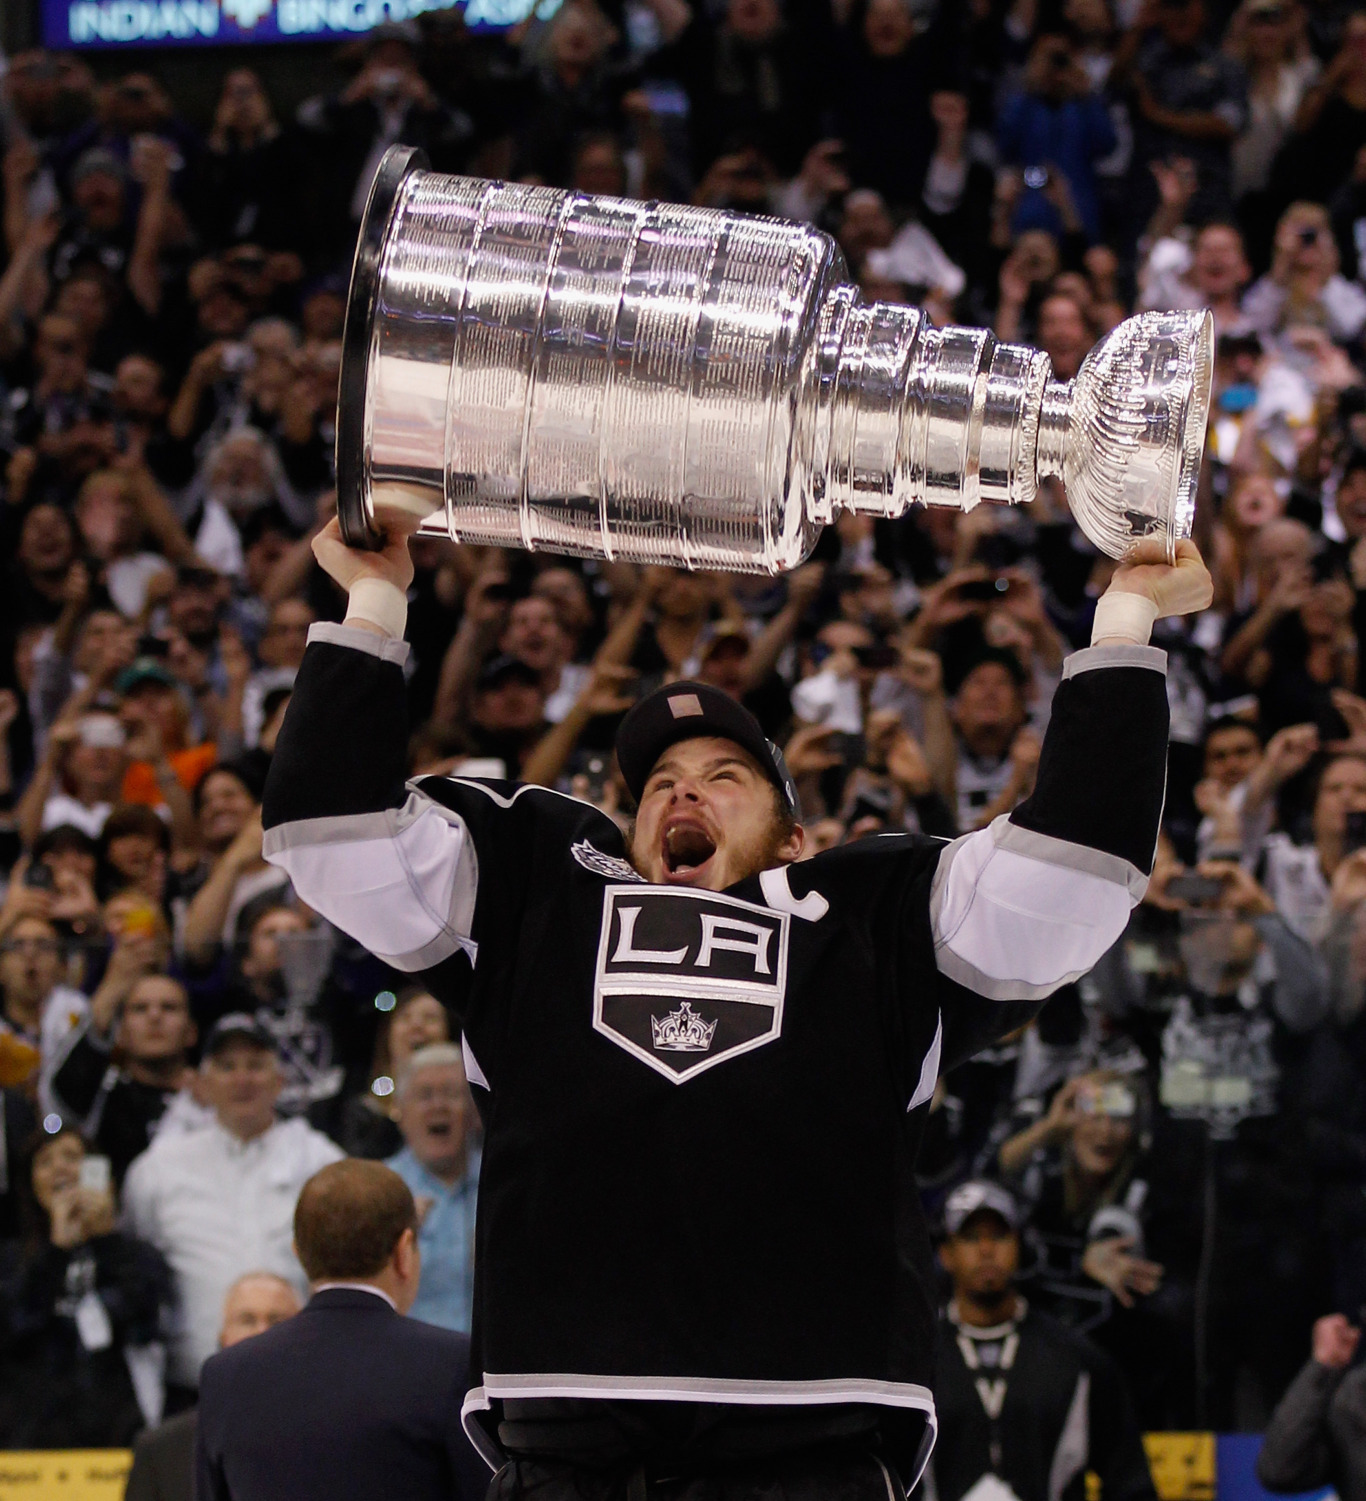 LA Kings - A true King 👑 Dustin Brown, a two-time Stanley Cup